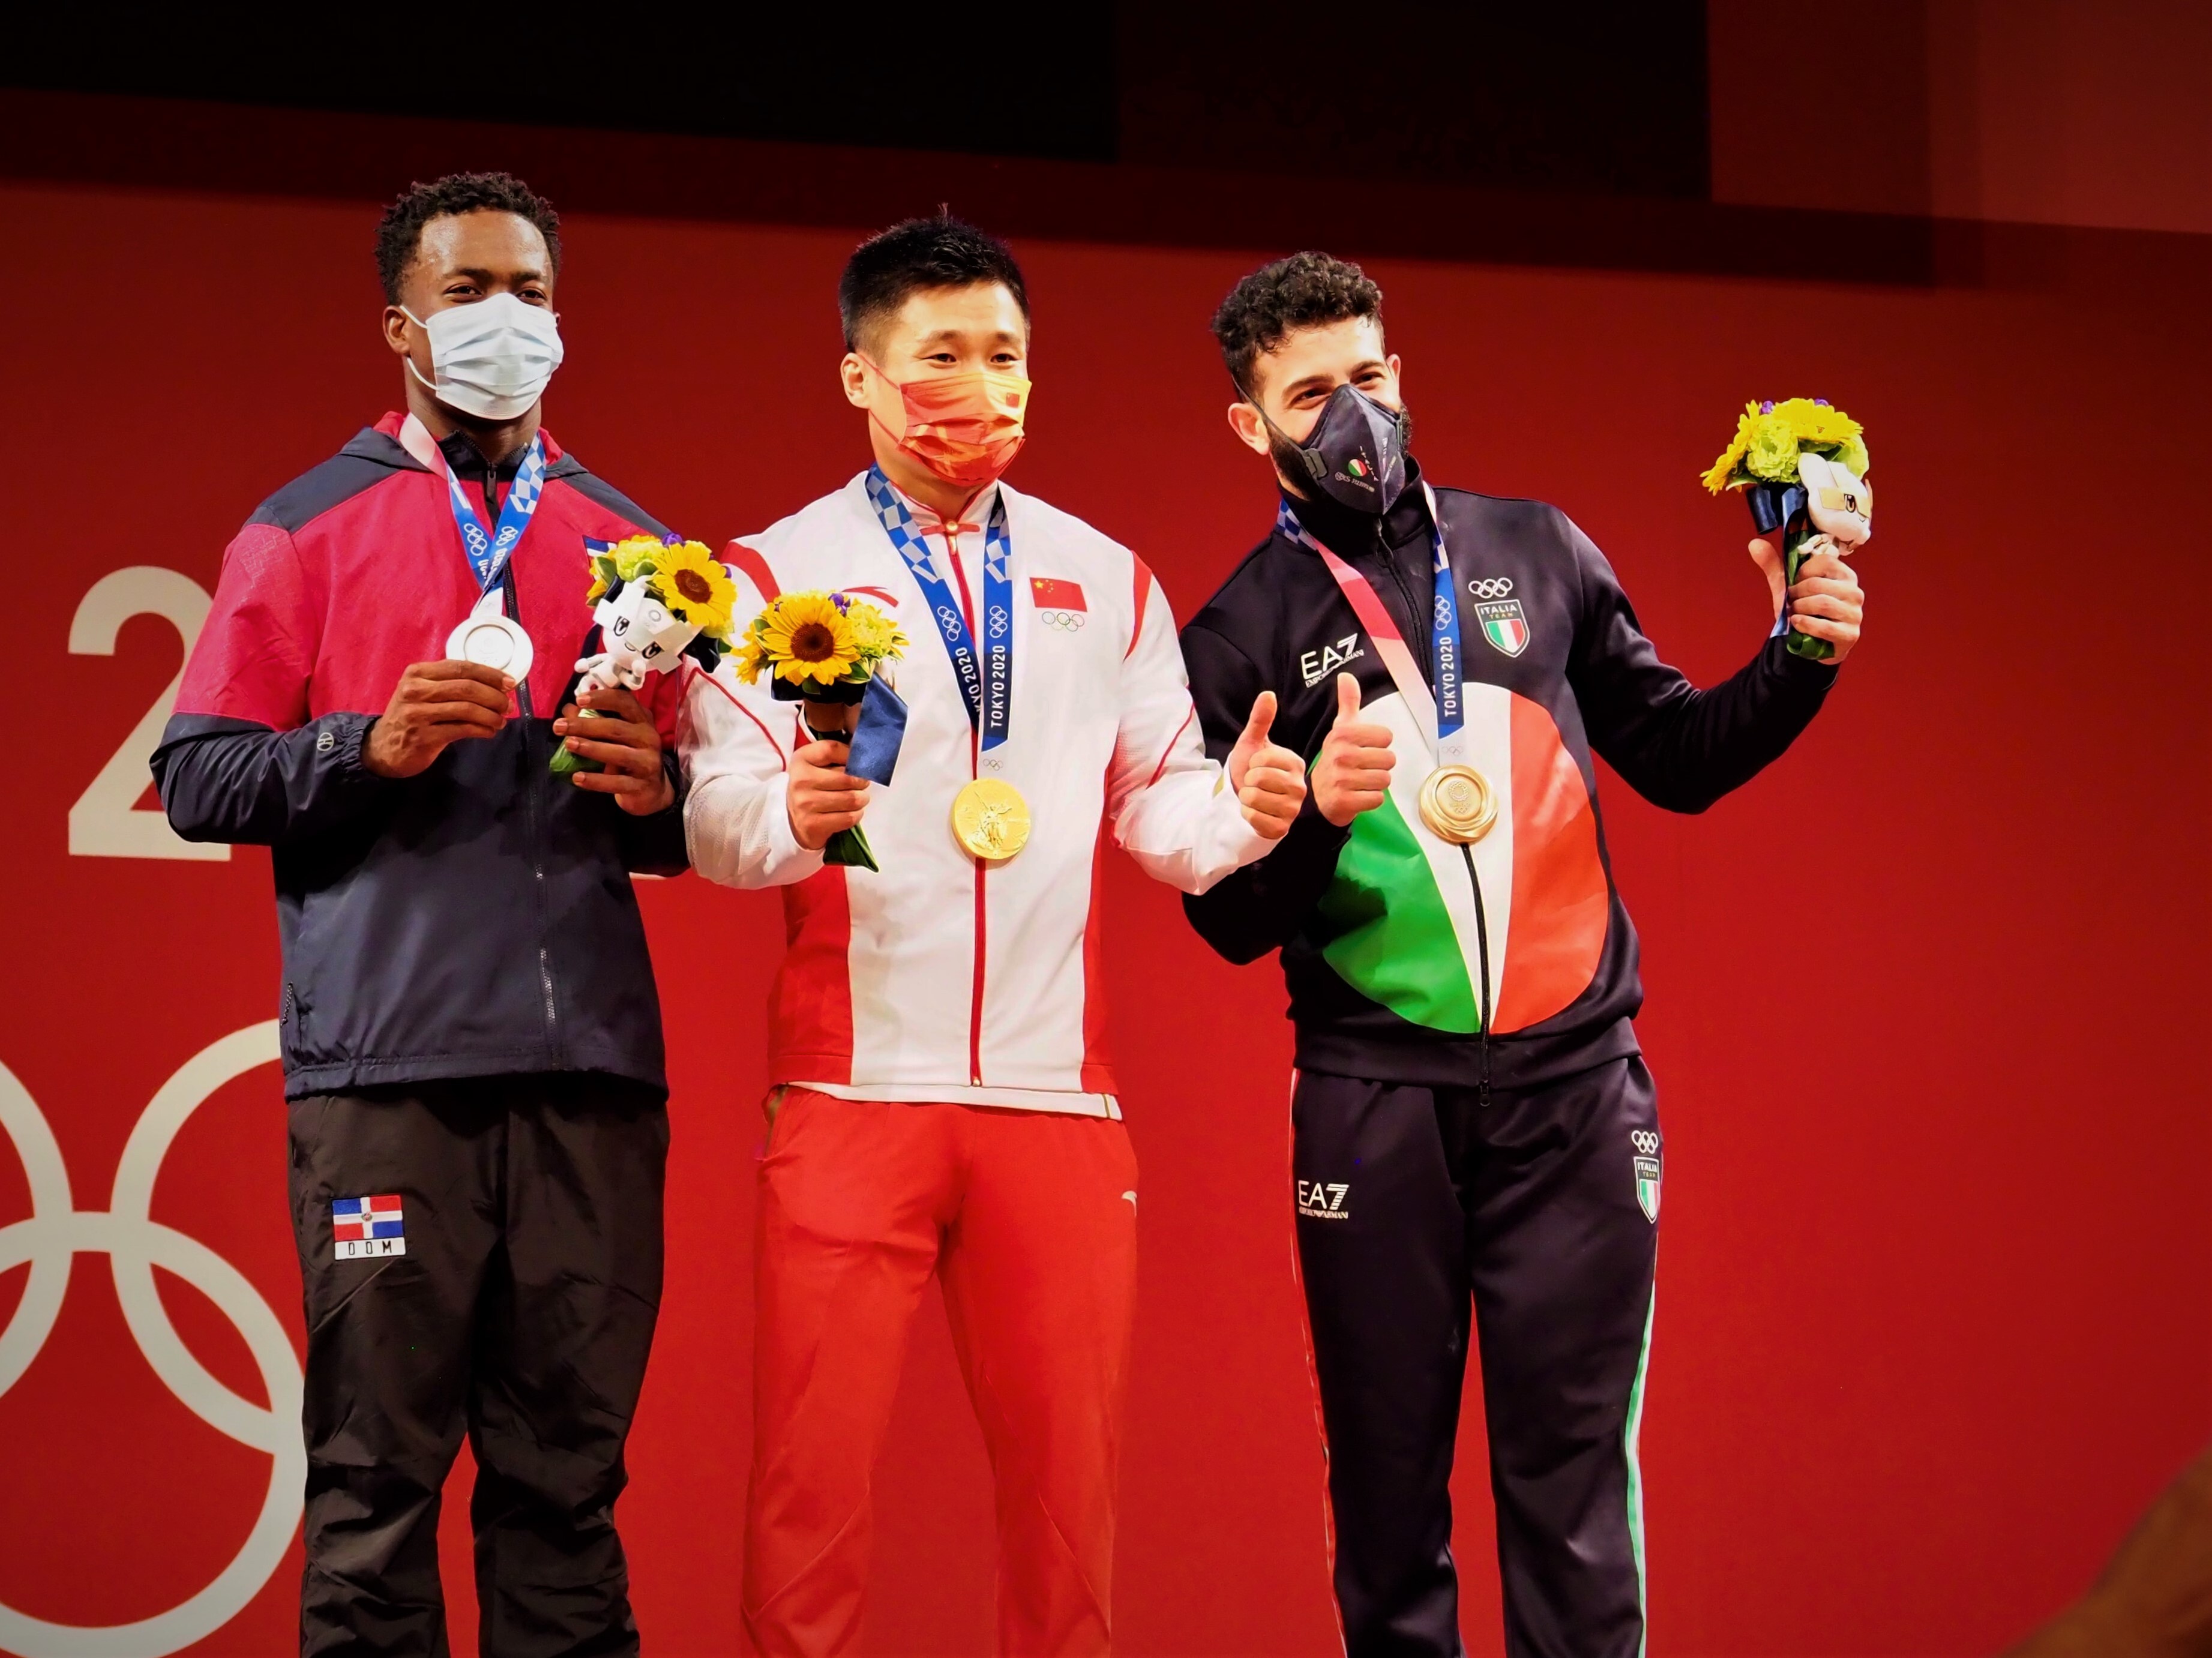 GALLERY: Time for the Big Guys - Scenes from the Men’s 81kg Group A at Tokyo 2020